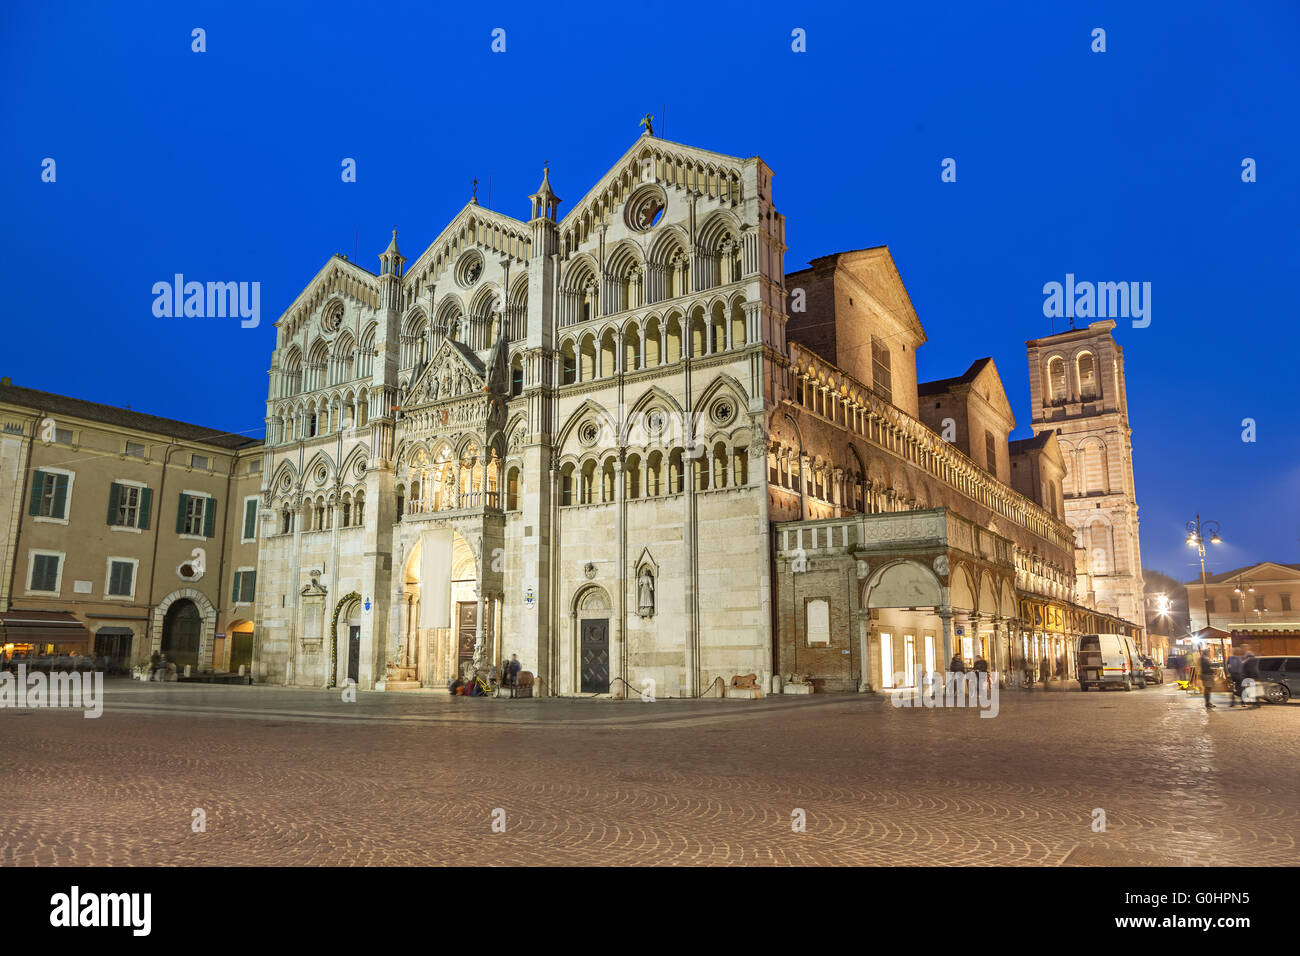 Cathedral of Saint George the Martyr located on Piazza della Cattedrale, Ferrara, Emilia-Romagna, Italy Stock Photo